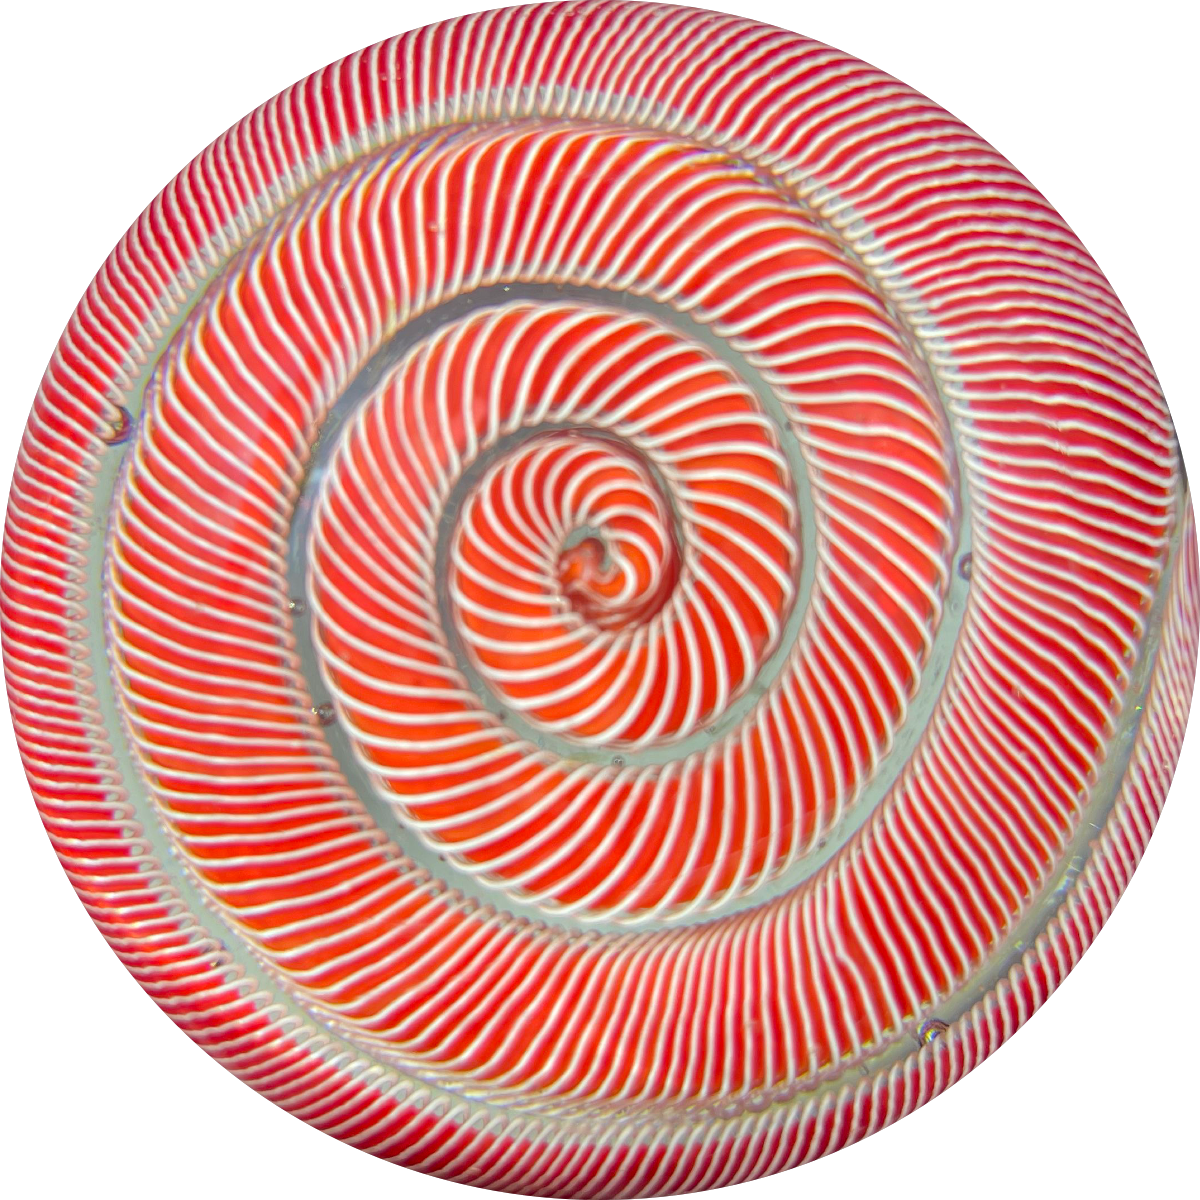 Vintage Murano Glass Art Paperweight Spiral Coiled Red and White Twist